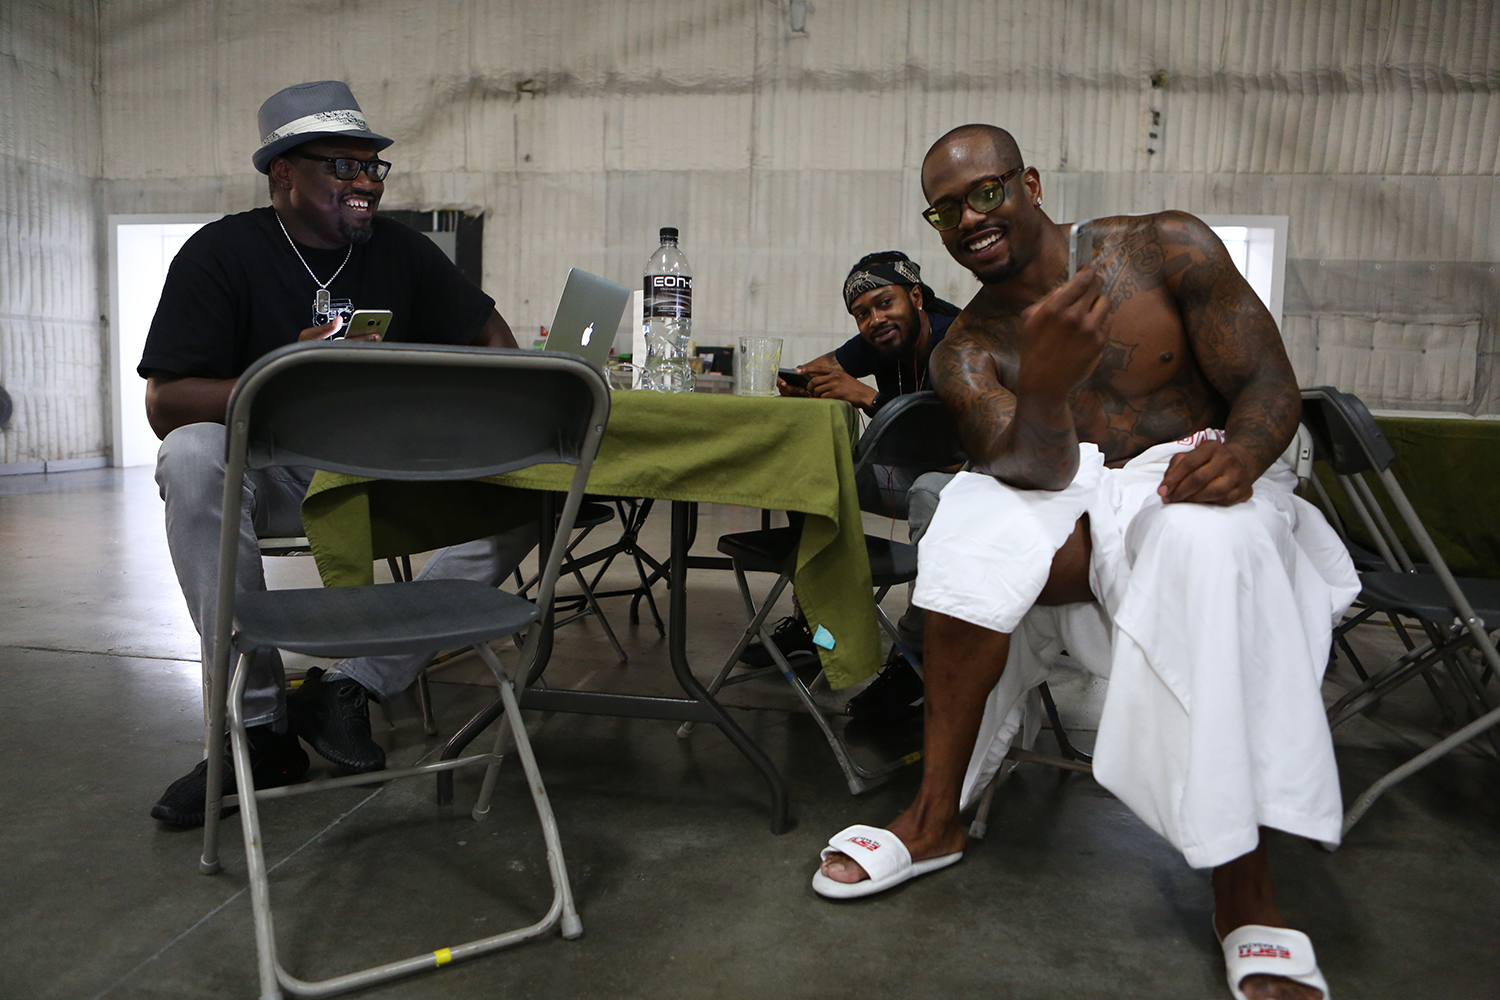  &nbsp;Miller hangs out with his agent, left, and his brother, center, during a short break. © Gail Fisher for ESPN    